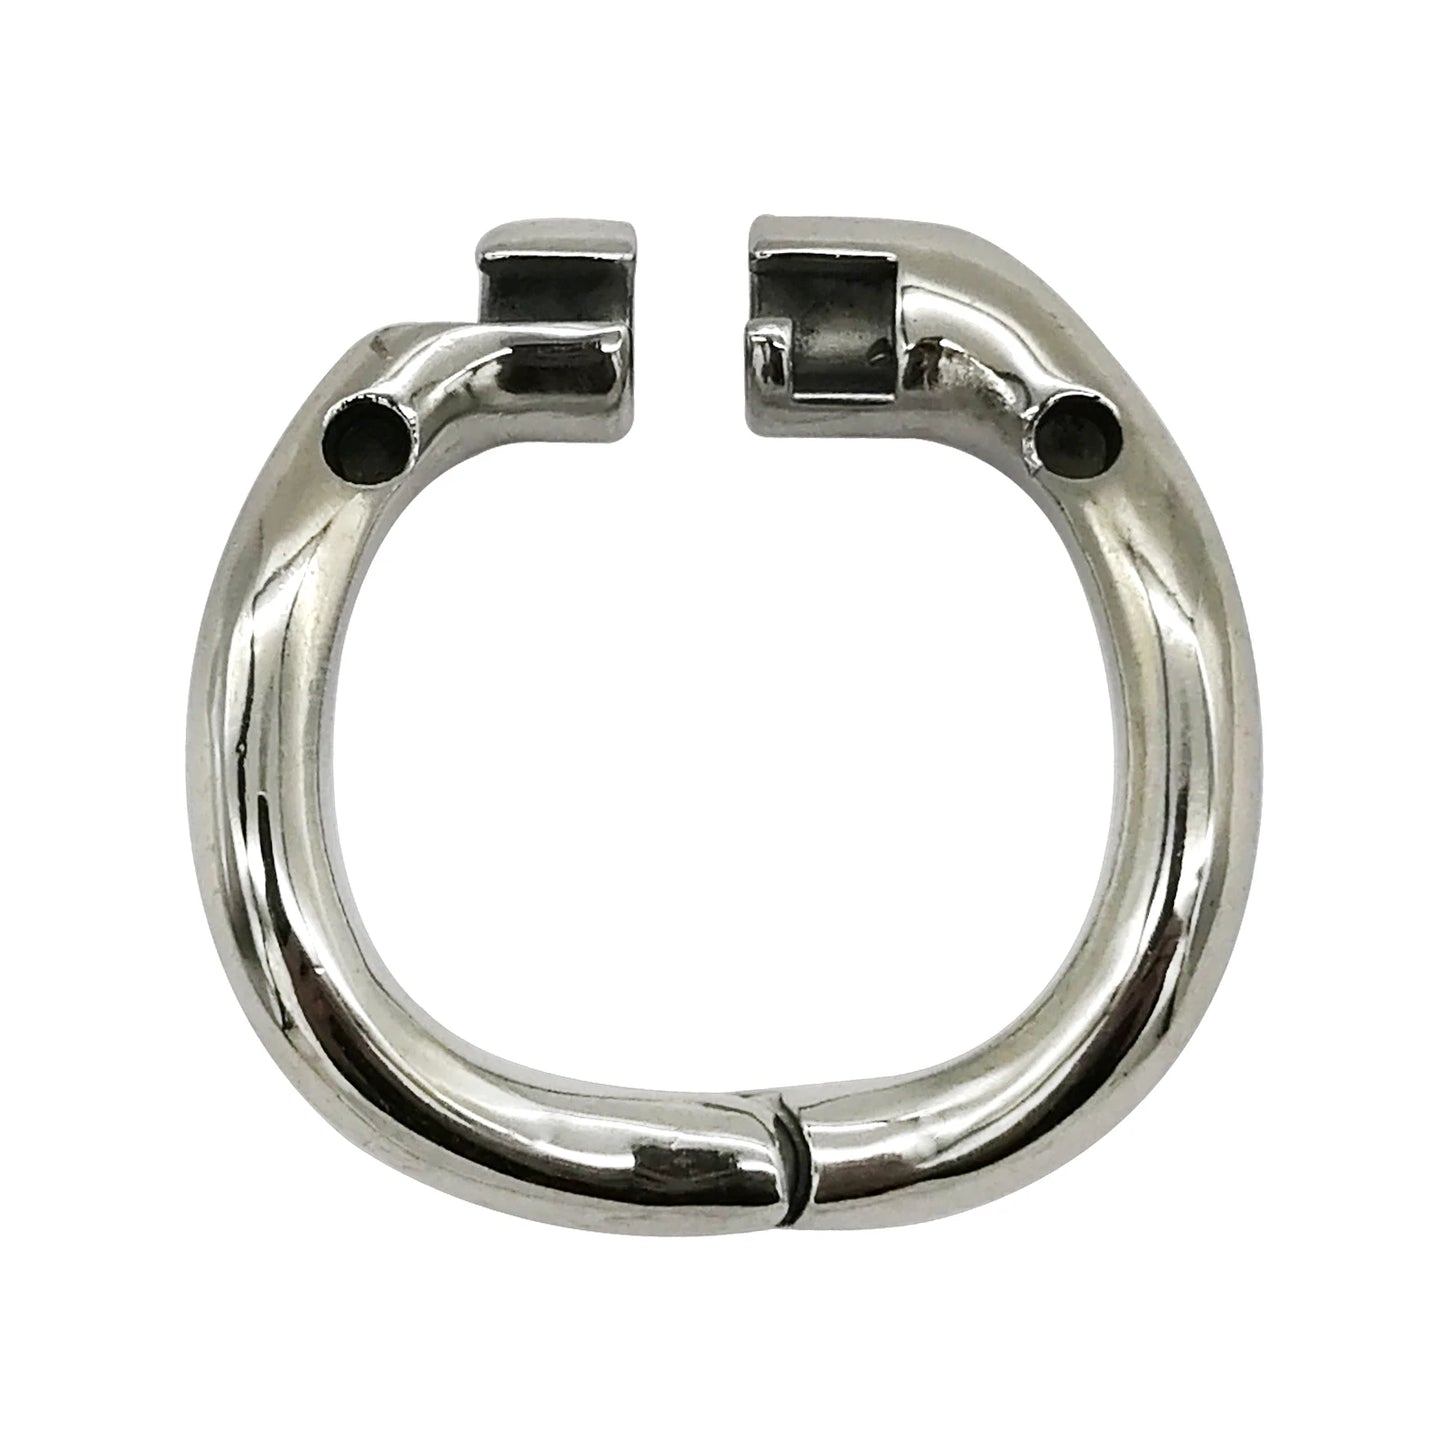 Flat Cage Stainless Steel Male Chastity Device, Super Small Cock Cage, Anti-Off Penis Ring Lock, Stealth Lock Chastity Belt